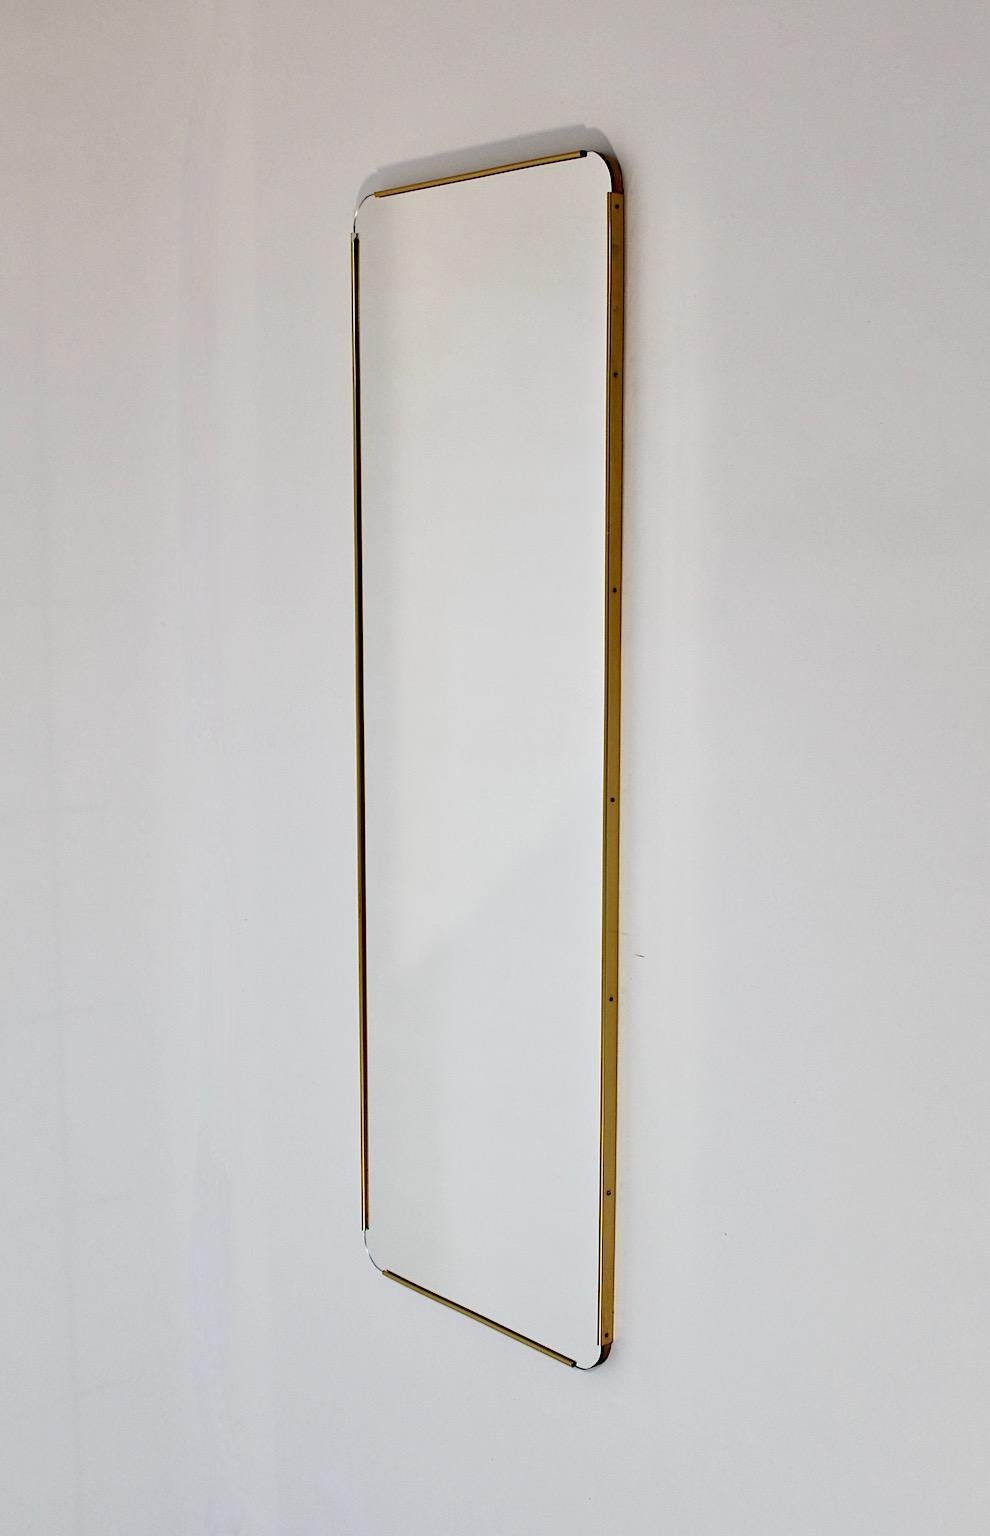 Mid Century Modern vintage floor mirror full length mirror in rectangular shape with brass frame, 1950s Italy.
An amazing vintage full length mirror or floor mirror with brass details along all sides and slightly rounded edges in rectangular